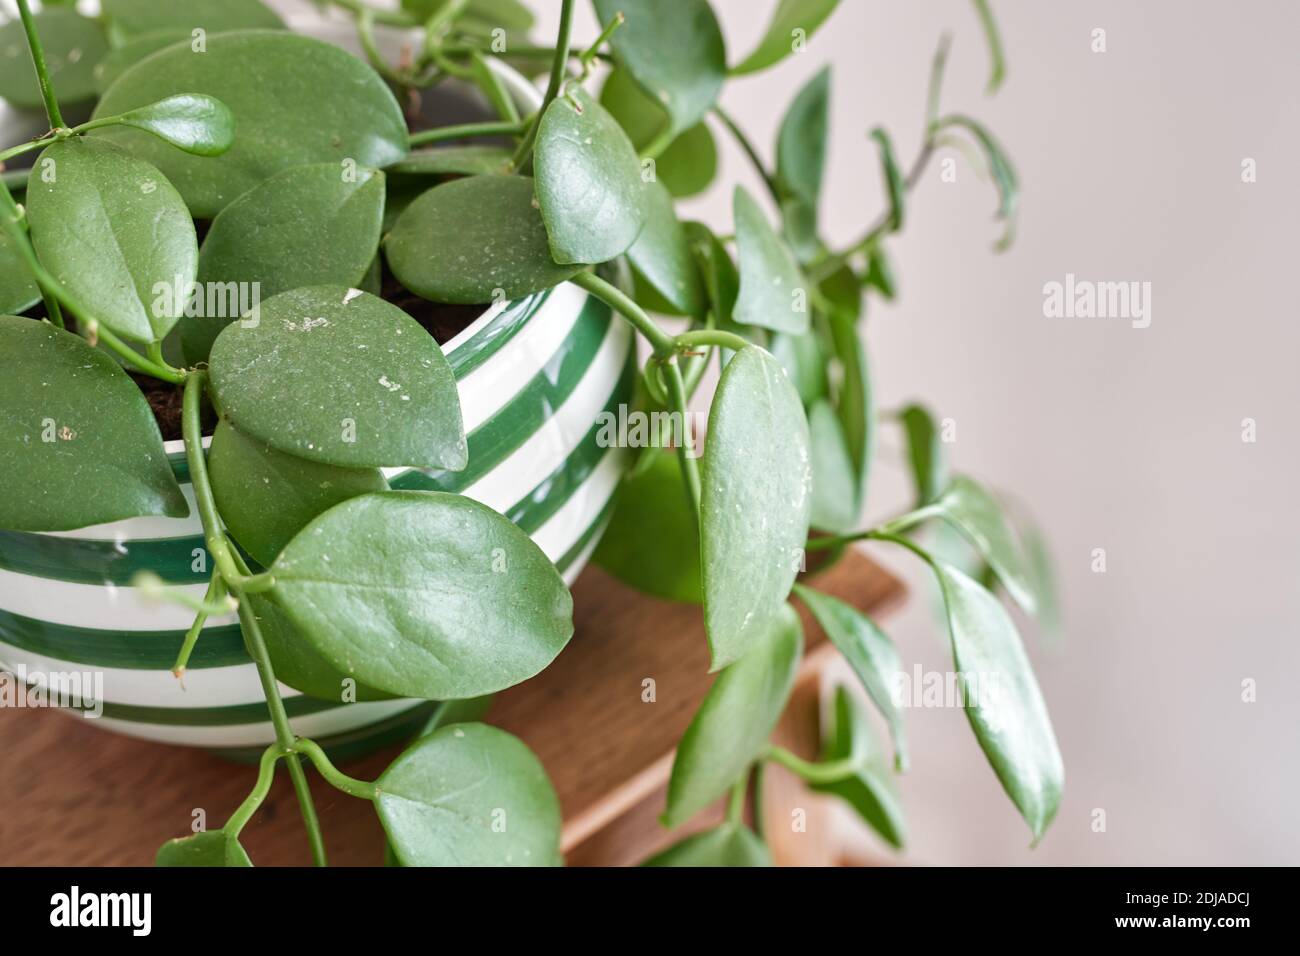 Hoya calycina stargazer in an pot with stripes, sitting on a wooden table. Close up. Stock Photo